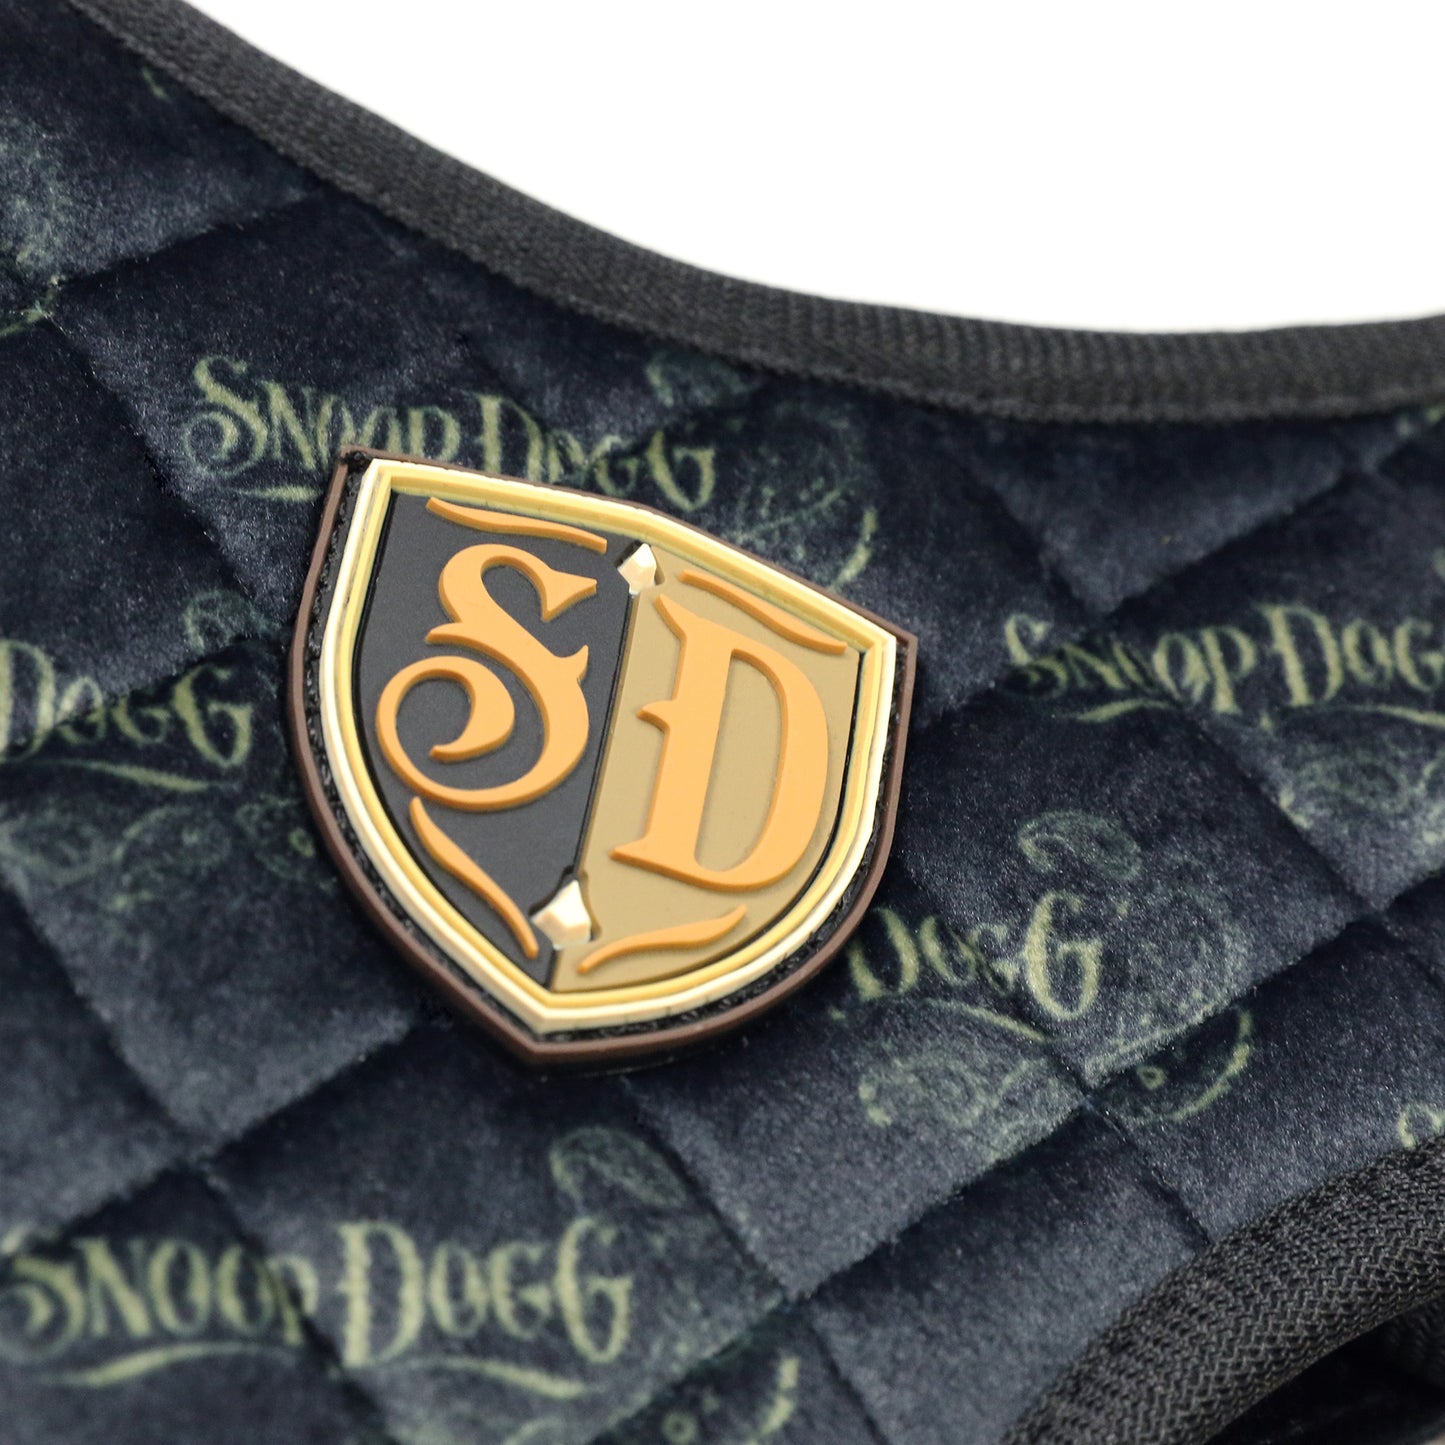 A close up detail image showing the SD Micro Mold Patch and velvet sublimated design on the Deluxe Quilted Pet Harness.